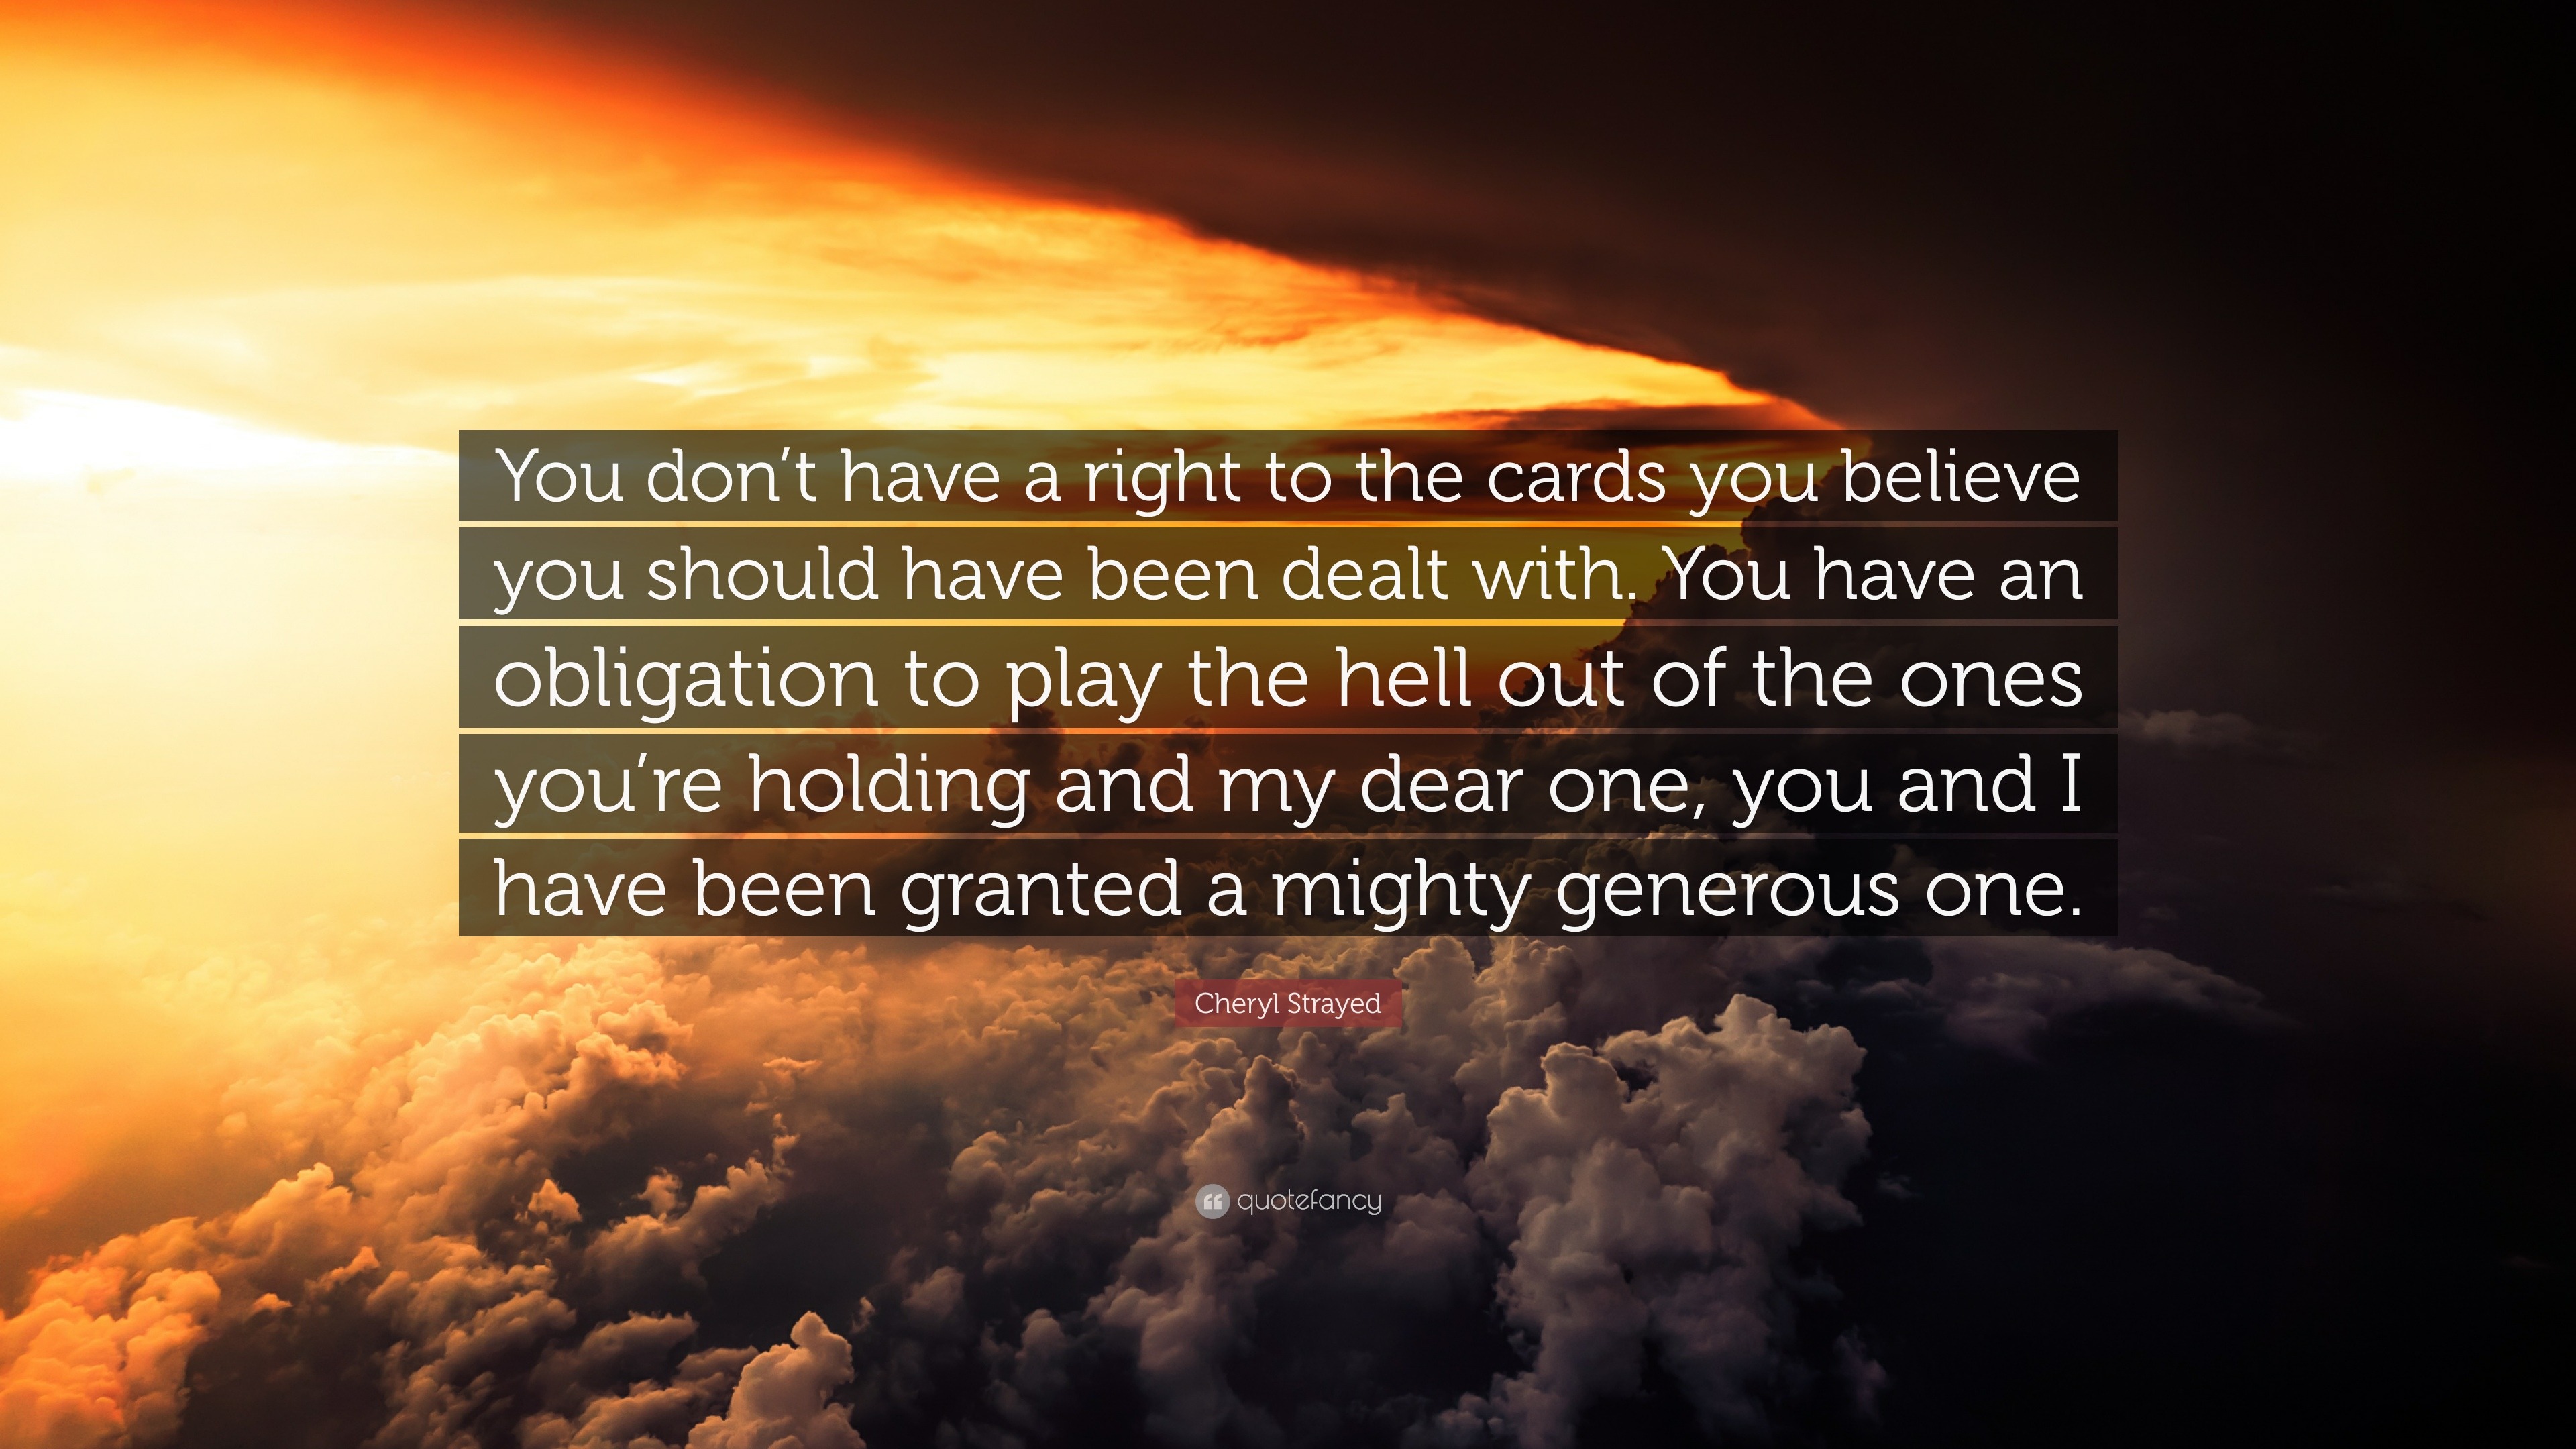 Cheryl Strayed Quote You Don T Have A Right To The Cards You Believe You Should Have Been Dealt With You Have An Obligation To Play The Hell